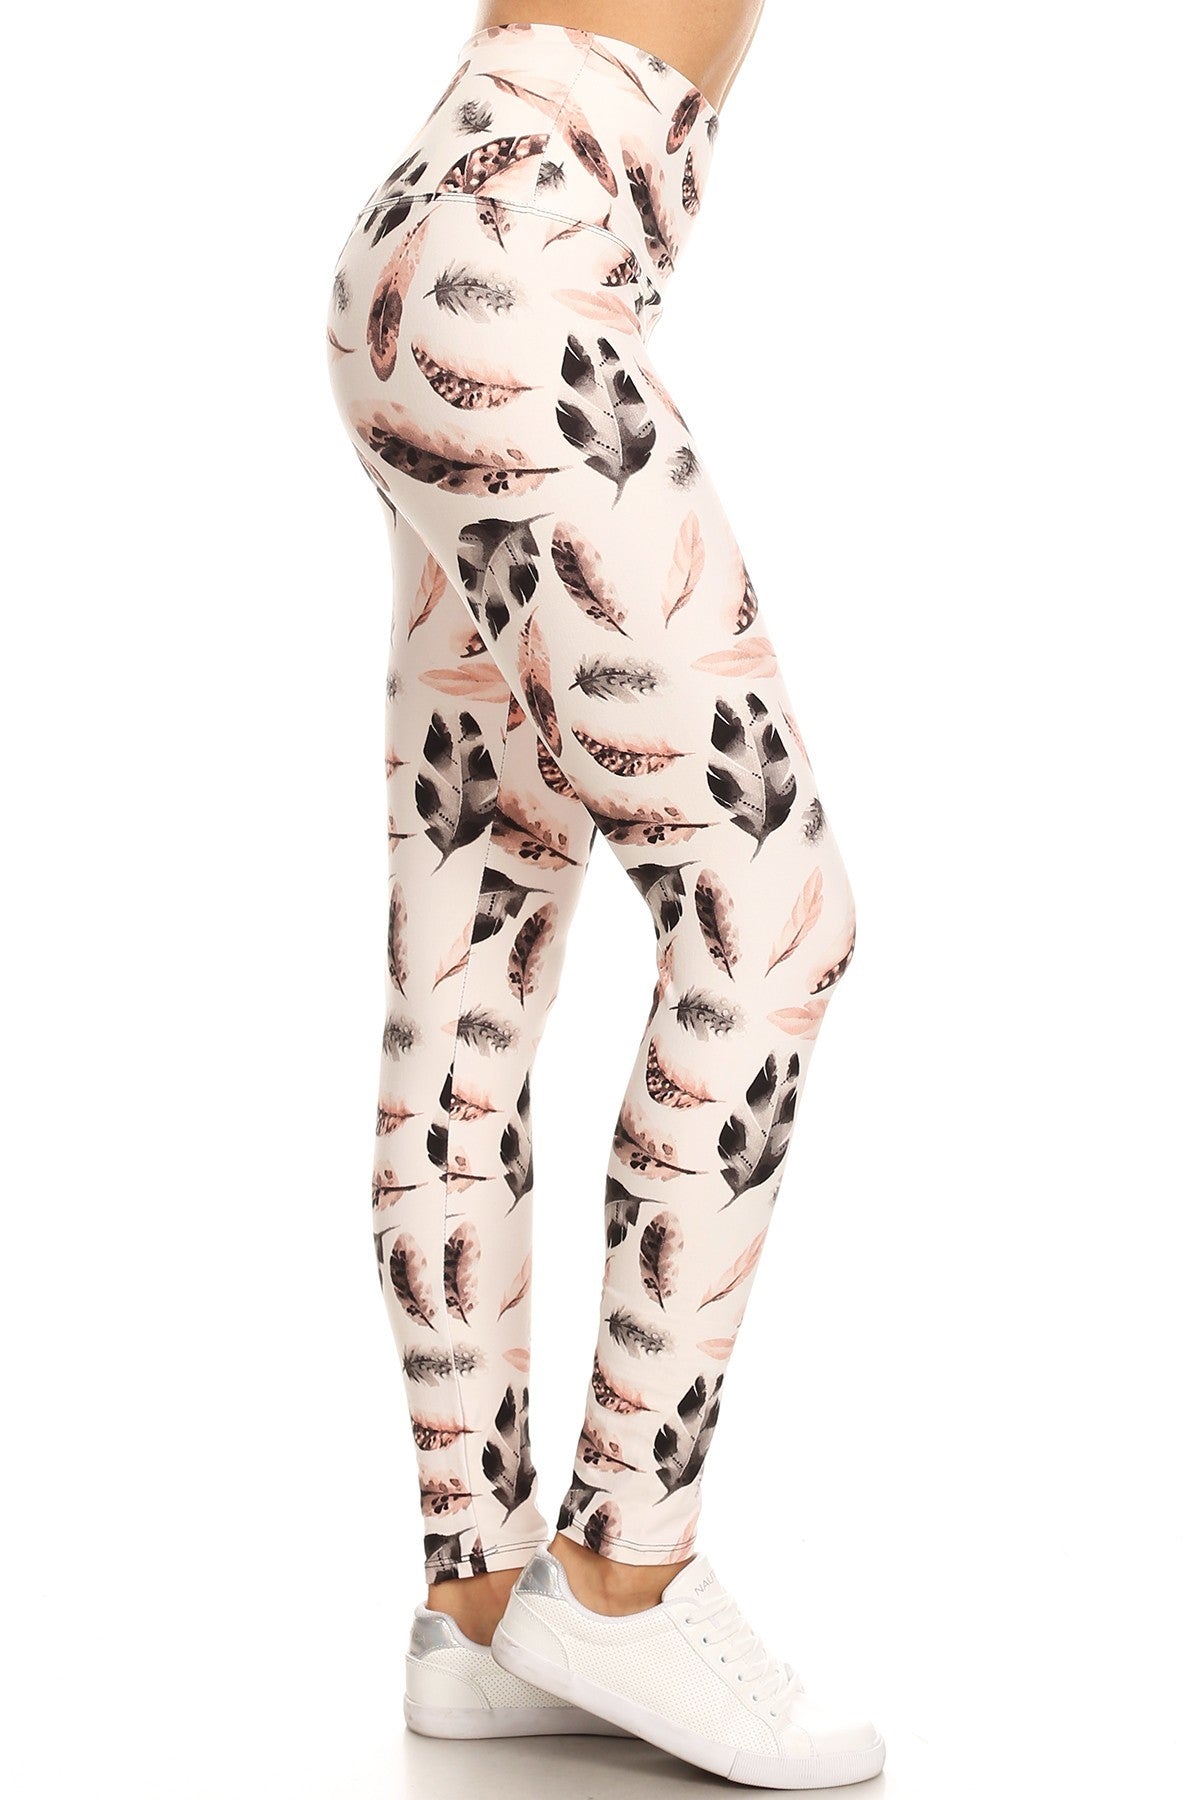 Long Yoga Style Banded Lined Leaf Printed Knit Legging With High Waist - Tigbul's Fashion